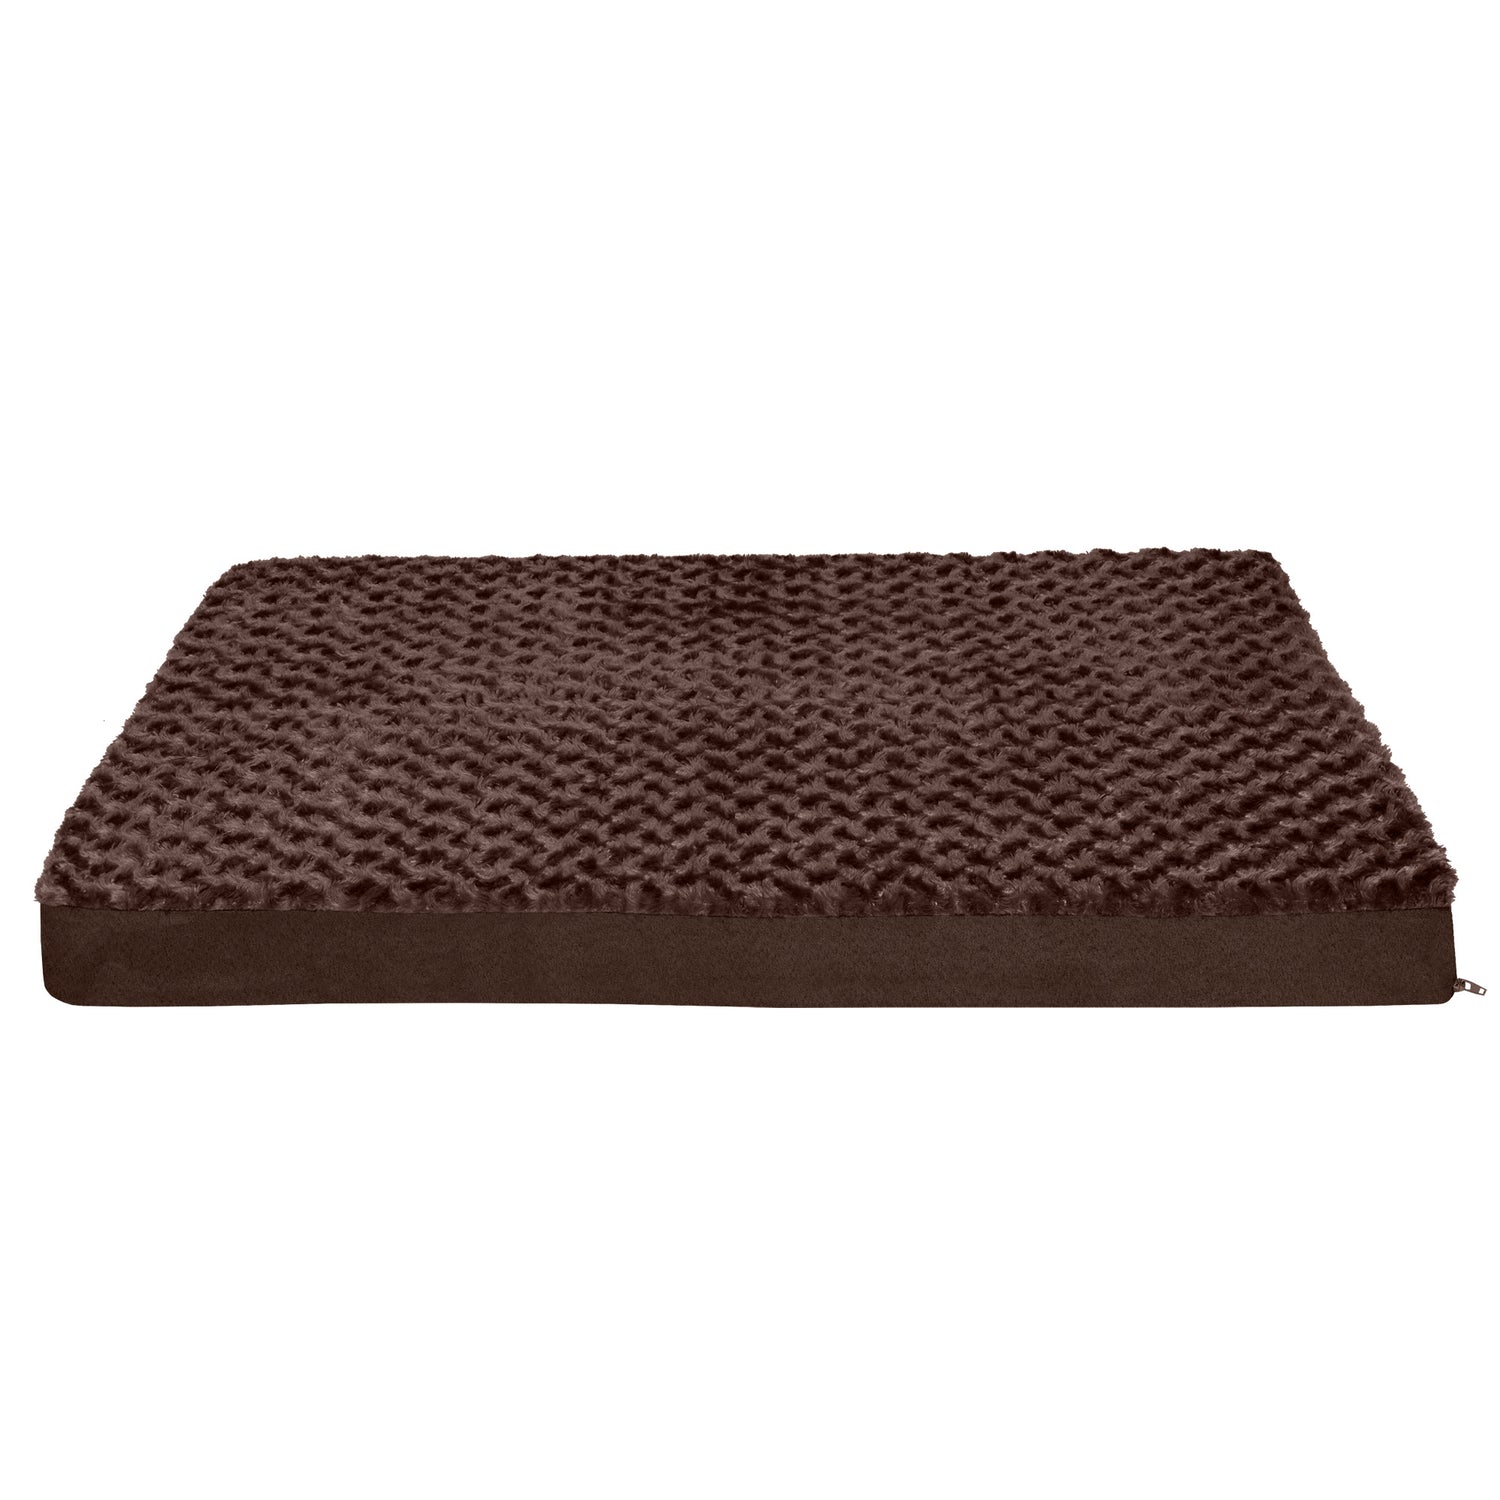 Furhaven Pet Dog Bed | Deluxe Memory Foam Ultra Plush Mattress Pet Bed for Dogs & Cats, Chocolate, Large Animals & Pet Supplies > Pet Supplies > Cat Supplies > Cat Beds FurHaven Pet   